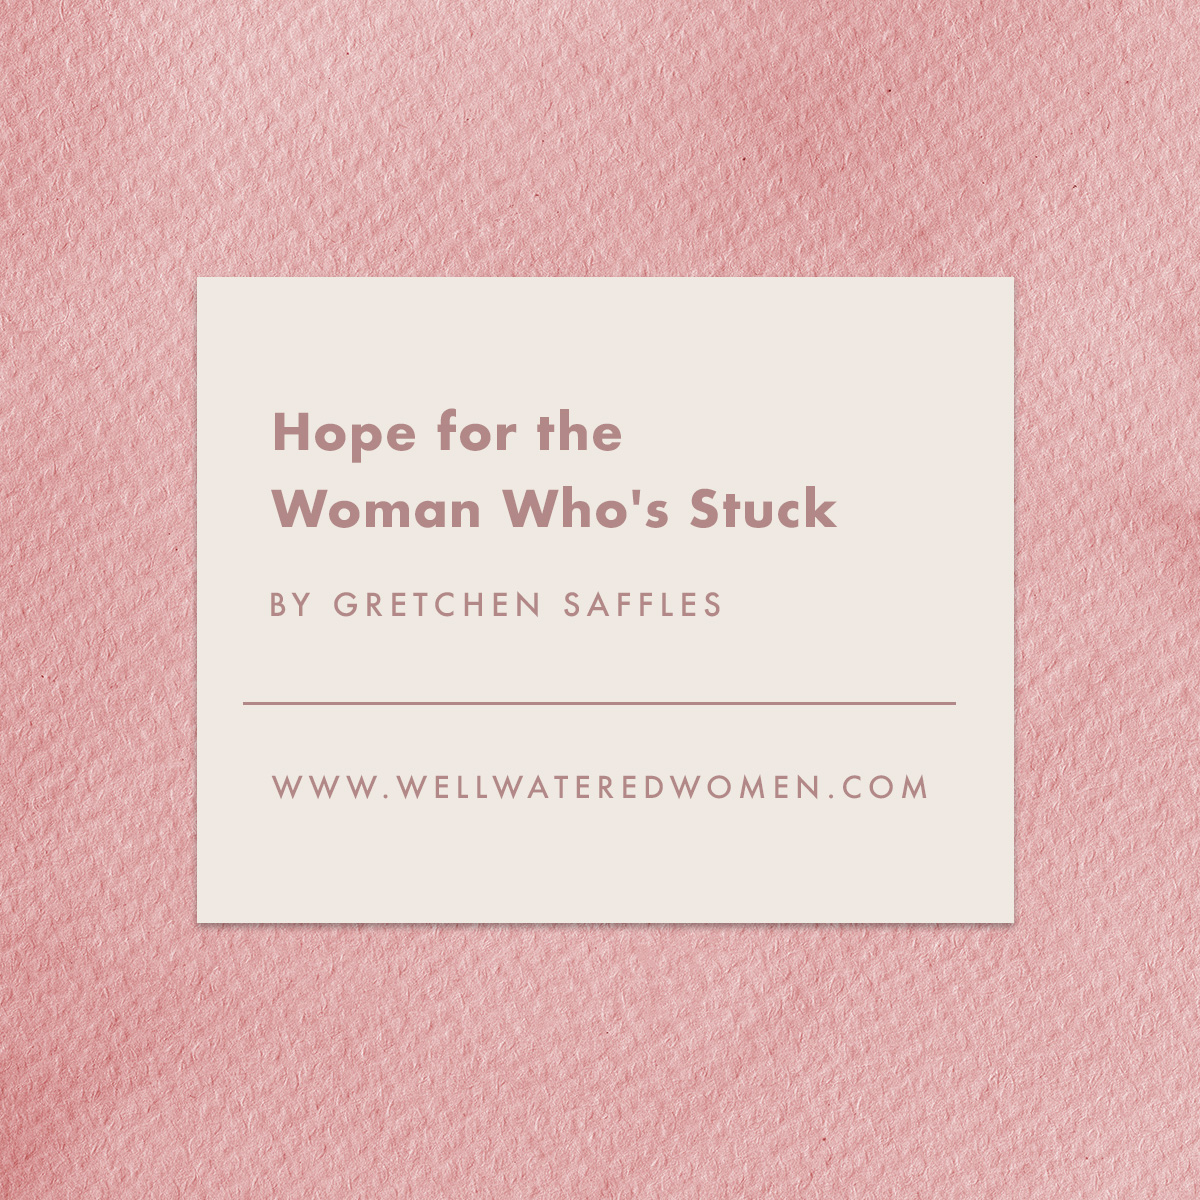 Hope for the Woman Who's Stuck - an Article from Well-Watered Women